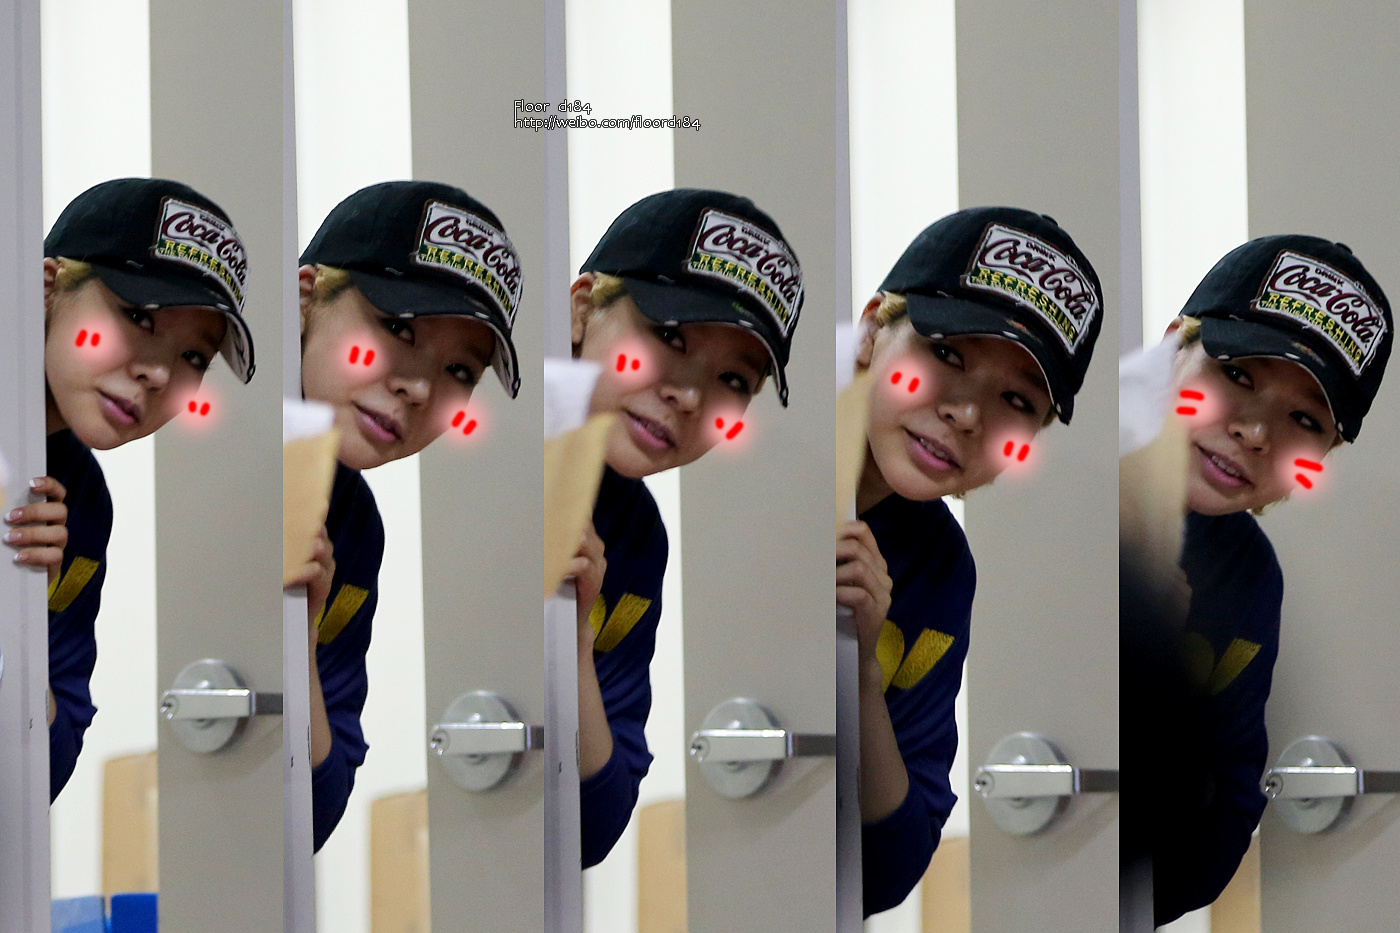 [OTHER][13/5/2012] Sunny||@ CATCH ME IF YOU CAN MUSICAL cute A3f1341bgw1dsvyzrc0hzj